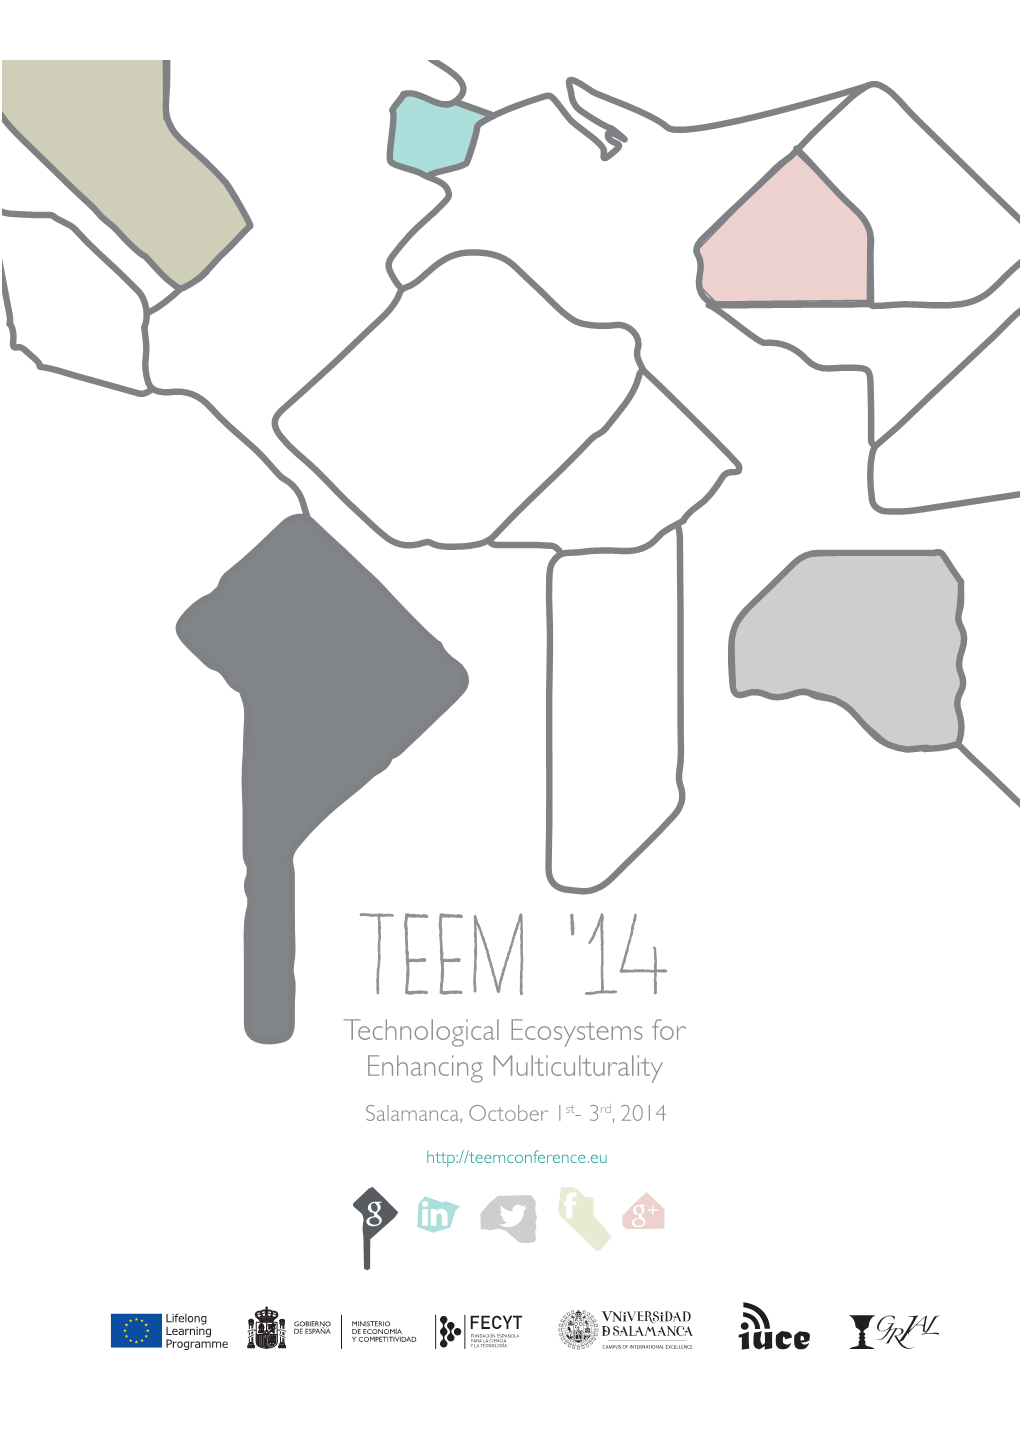 TEEM ‘14 Technological Ecosystems for Enhancing Multiculturality Salamanca, October 1St- 3Rd, 2014